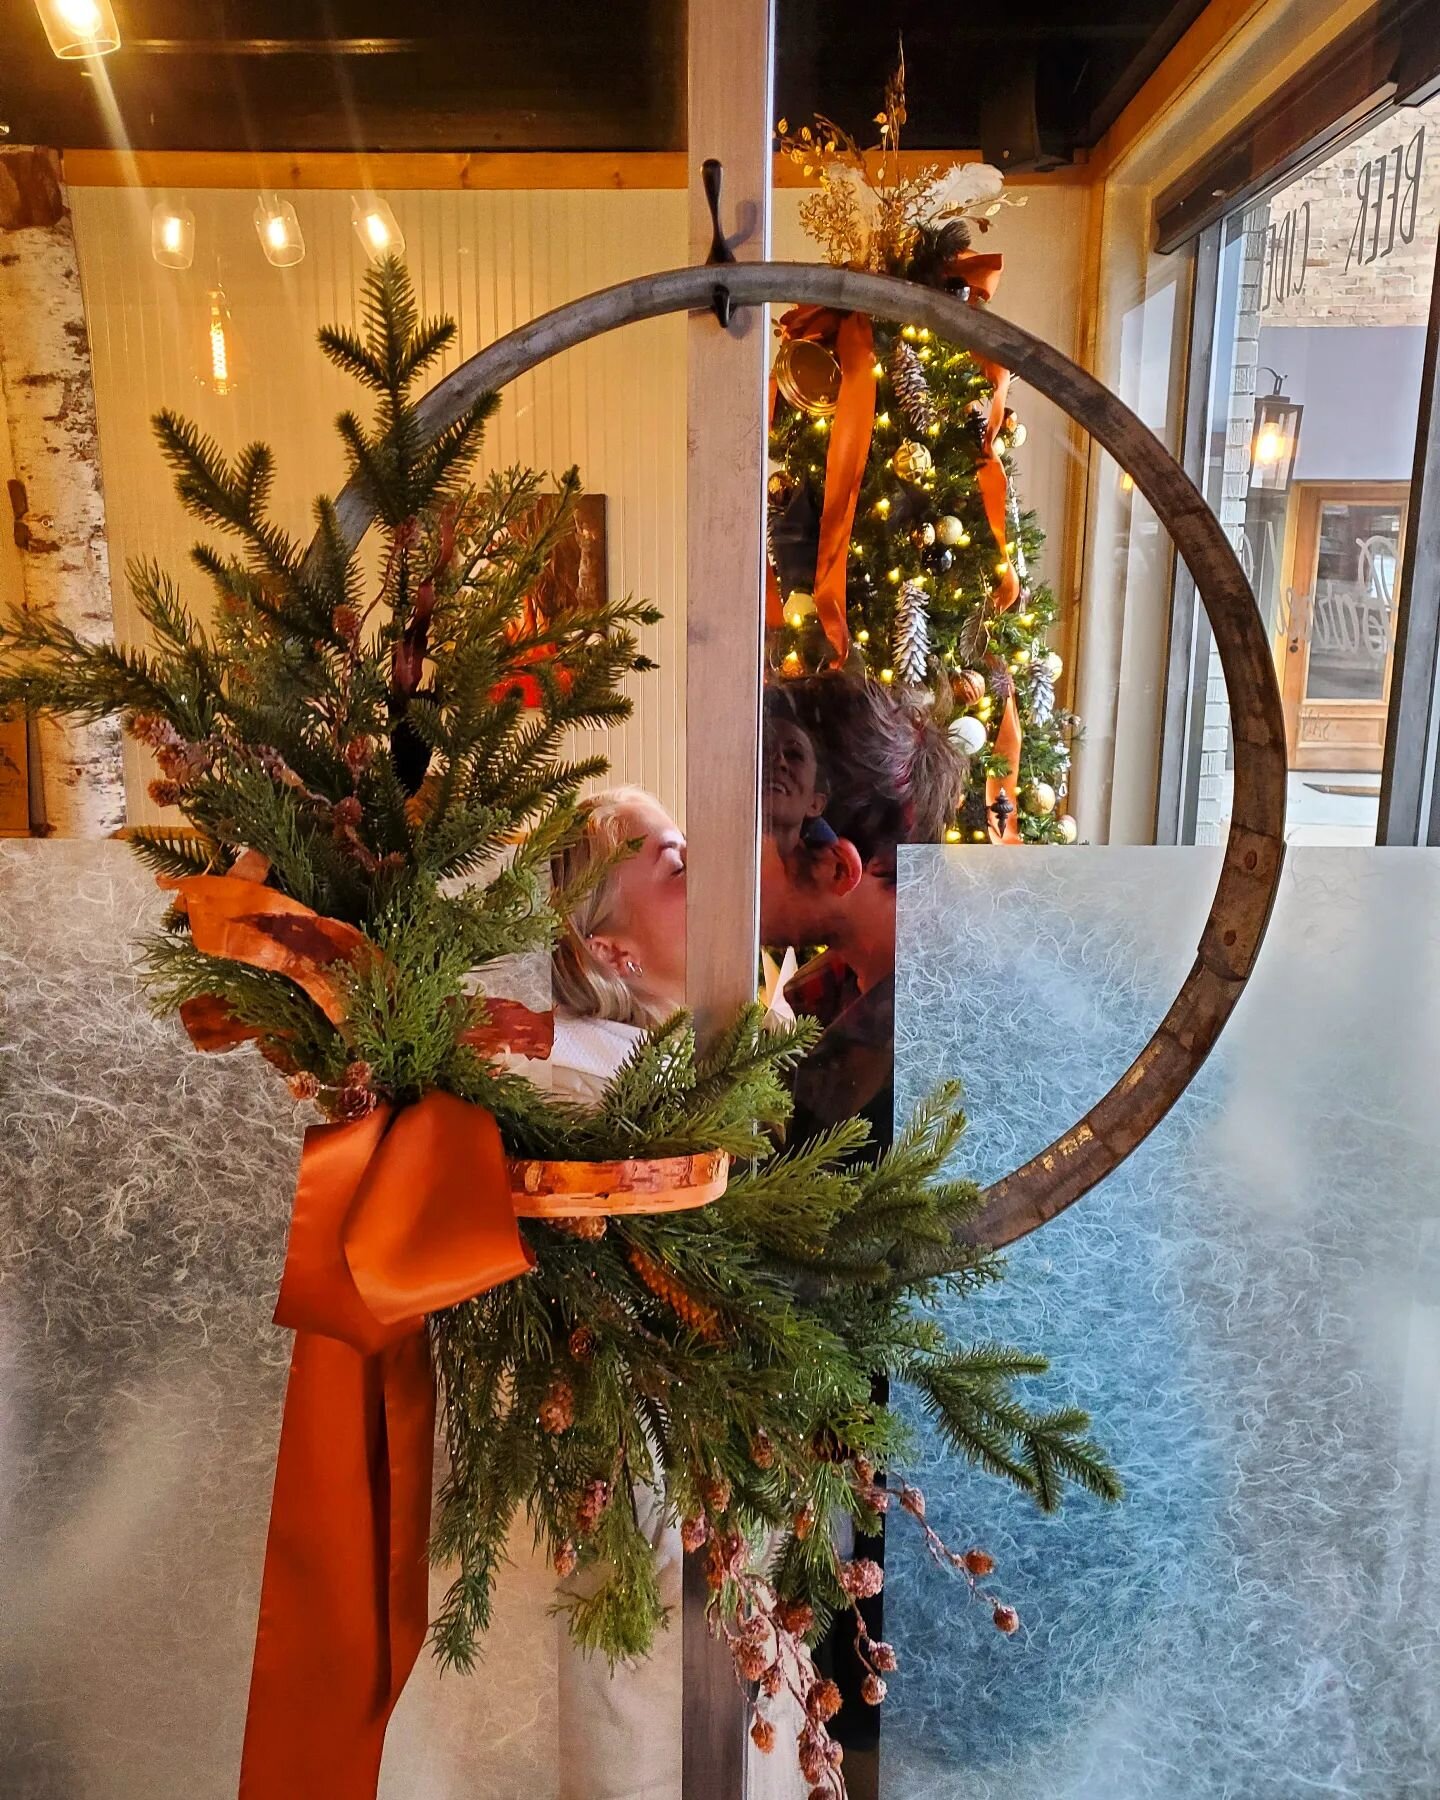 Who needs mistletoe? 🎅🏻

Check out this beautiful wreath made with our barrel ring from @9bwreaths 
You still have time to sign up for her class with us December 9th! 

Tickets include all instruction, a variety of decor for your wreath to customiz